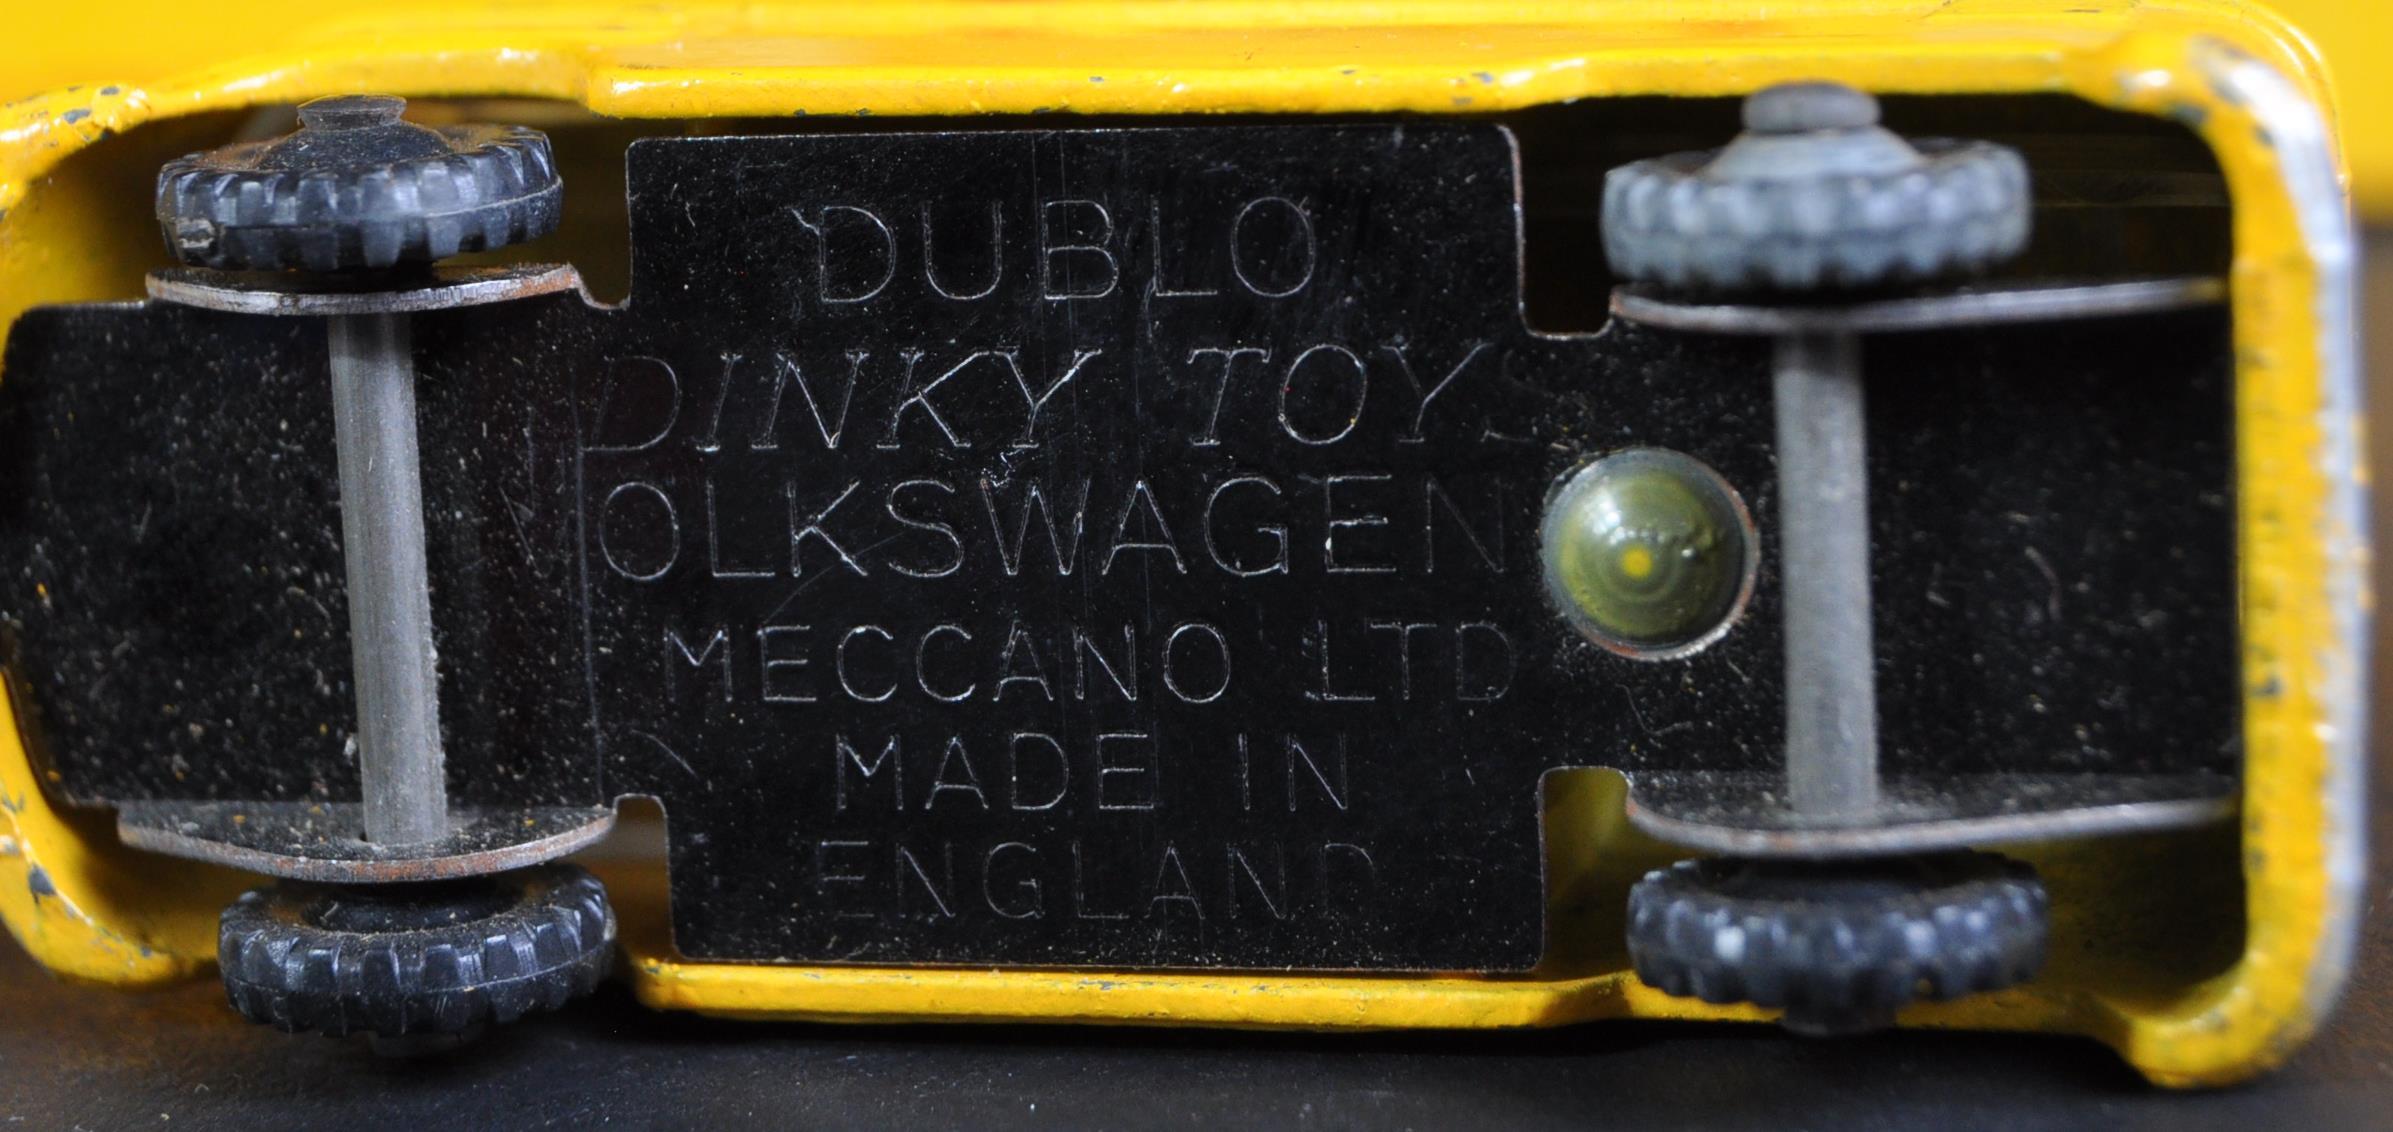 COLLECTION OF VINTAGE DUBLO DINKY TOYS DIECAST MODELS - Image 7 of 10